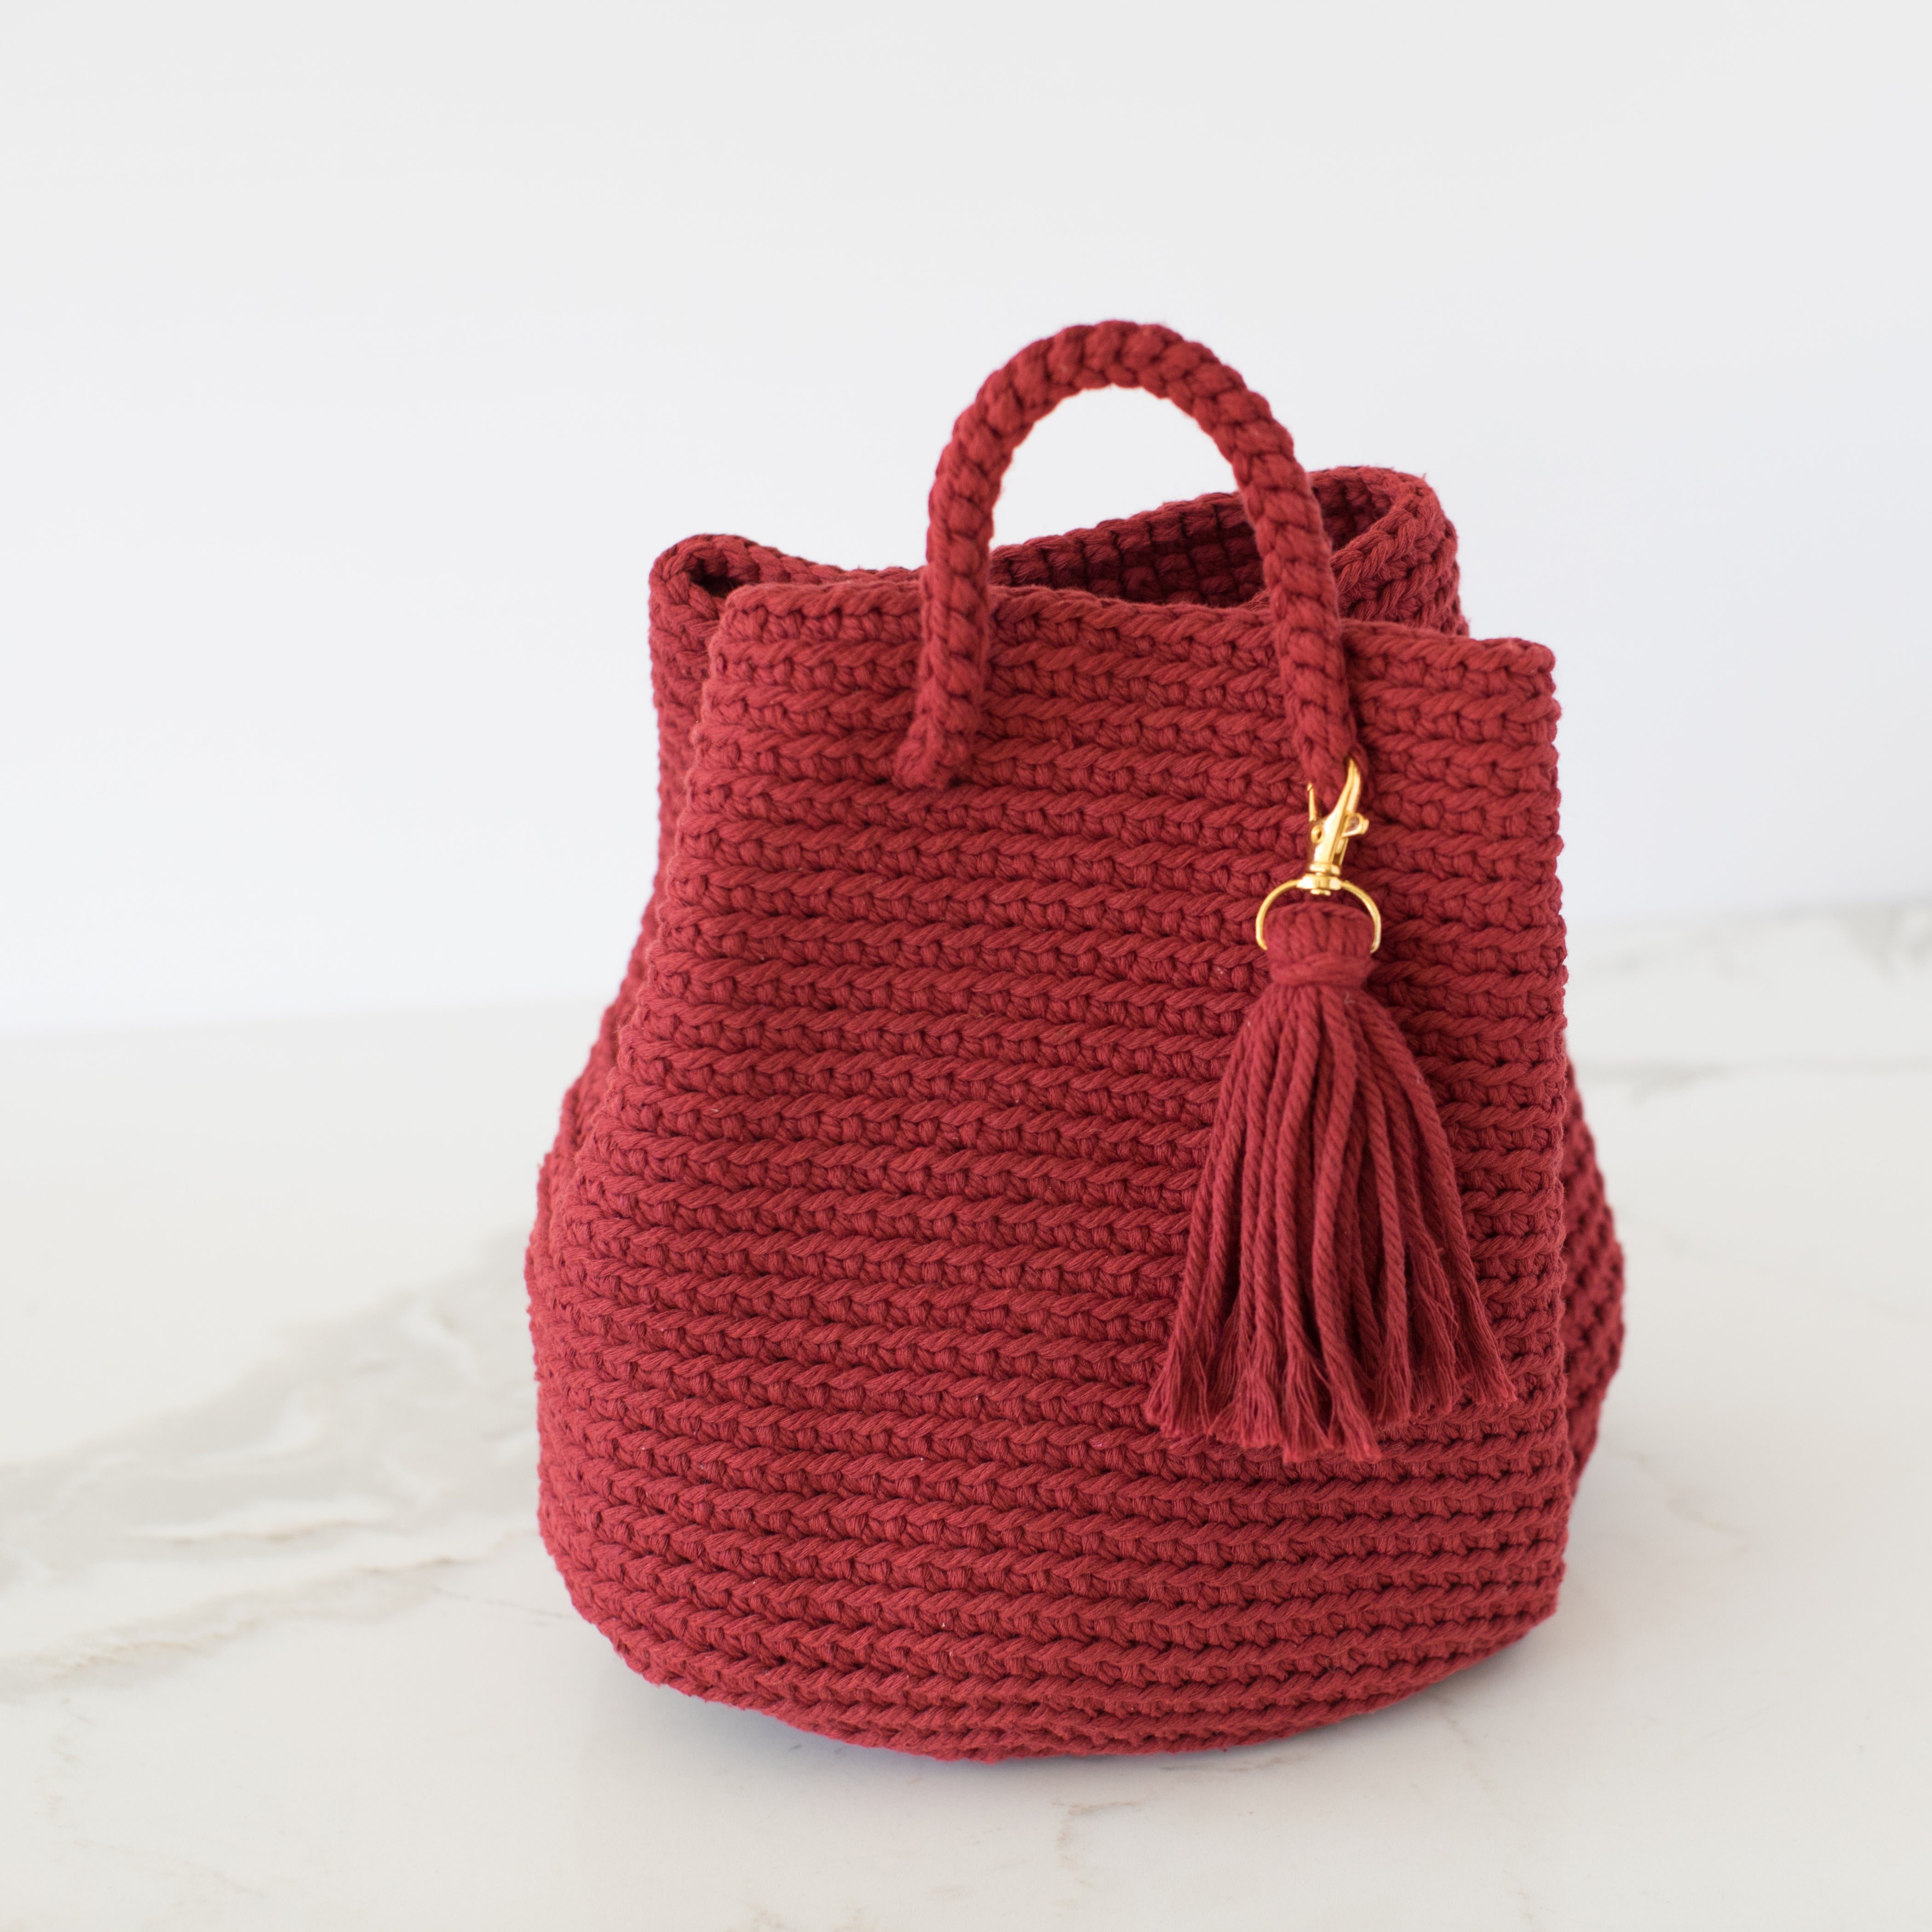 9 FREE Crochet Bags To Make This Summer | Top Crochet Patterns